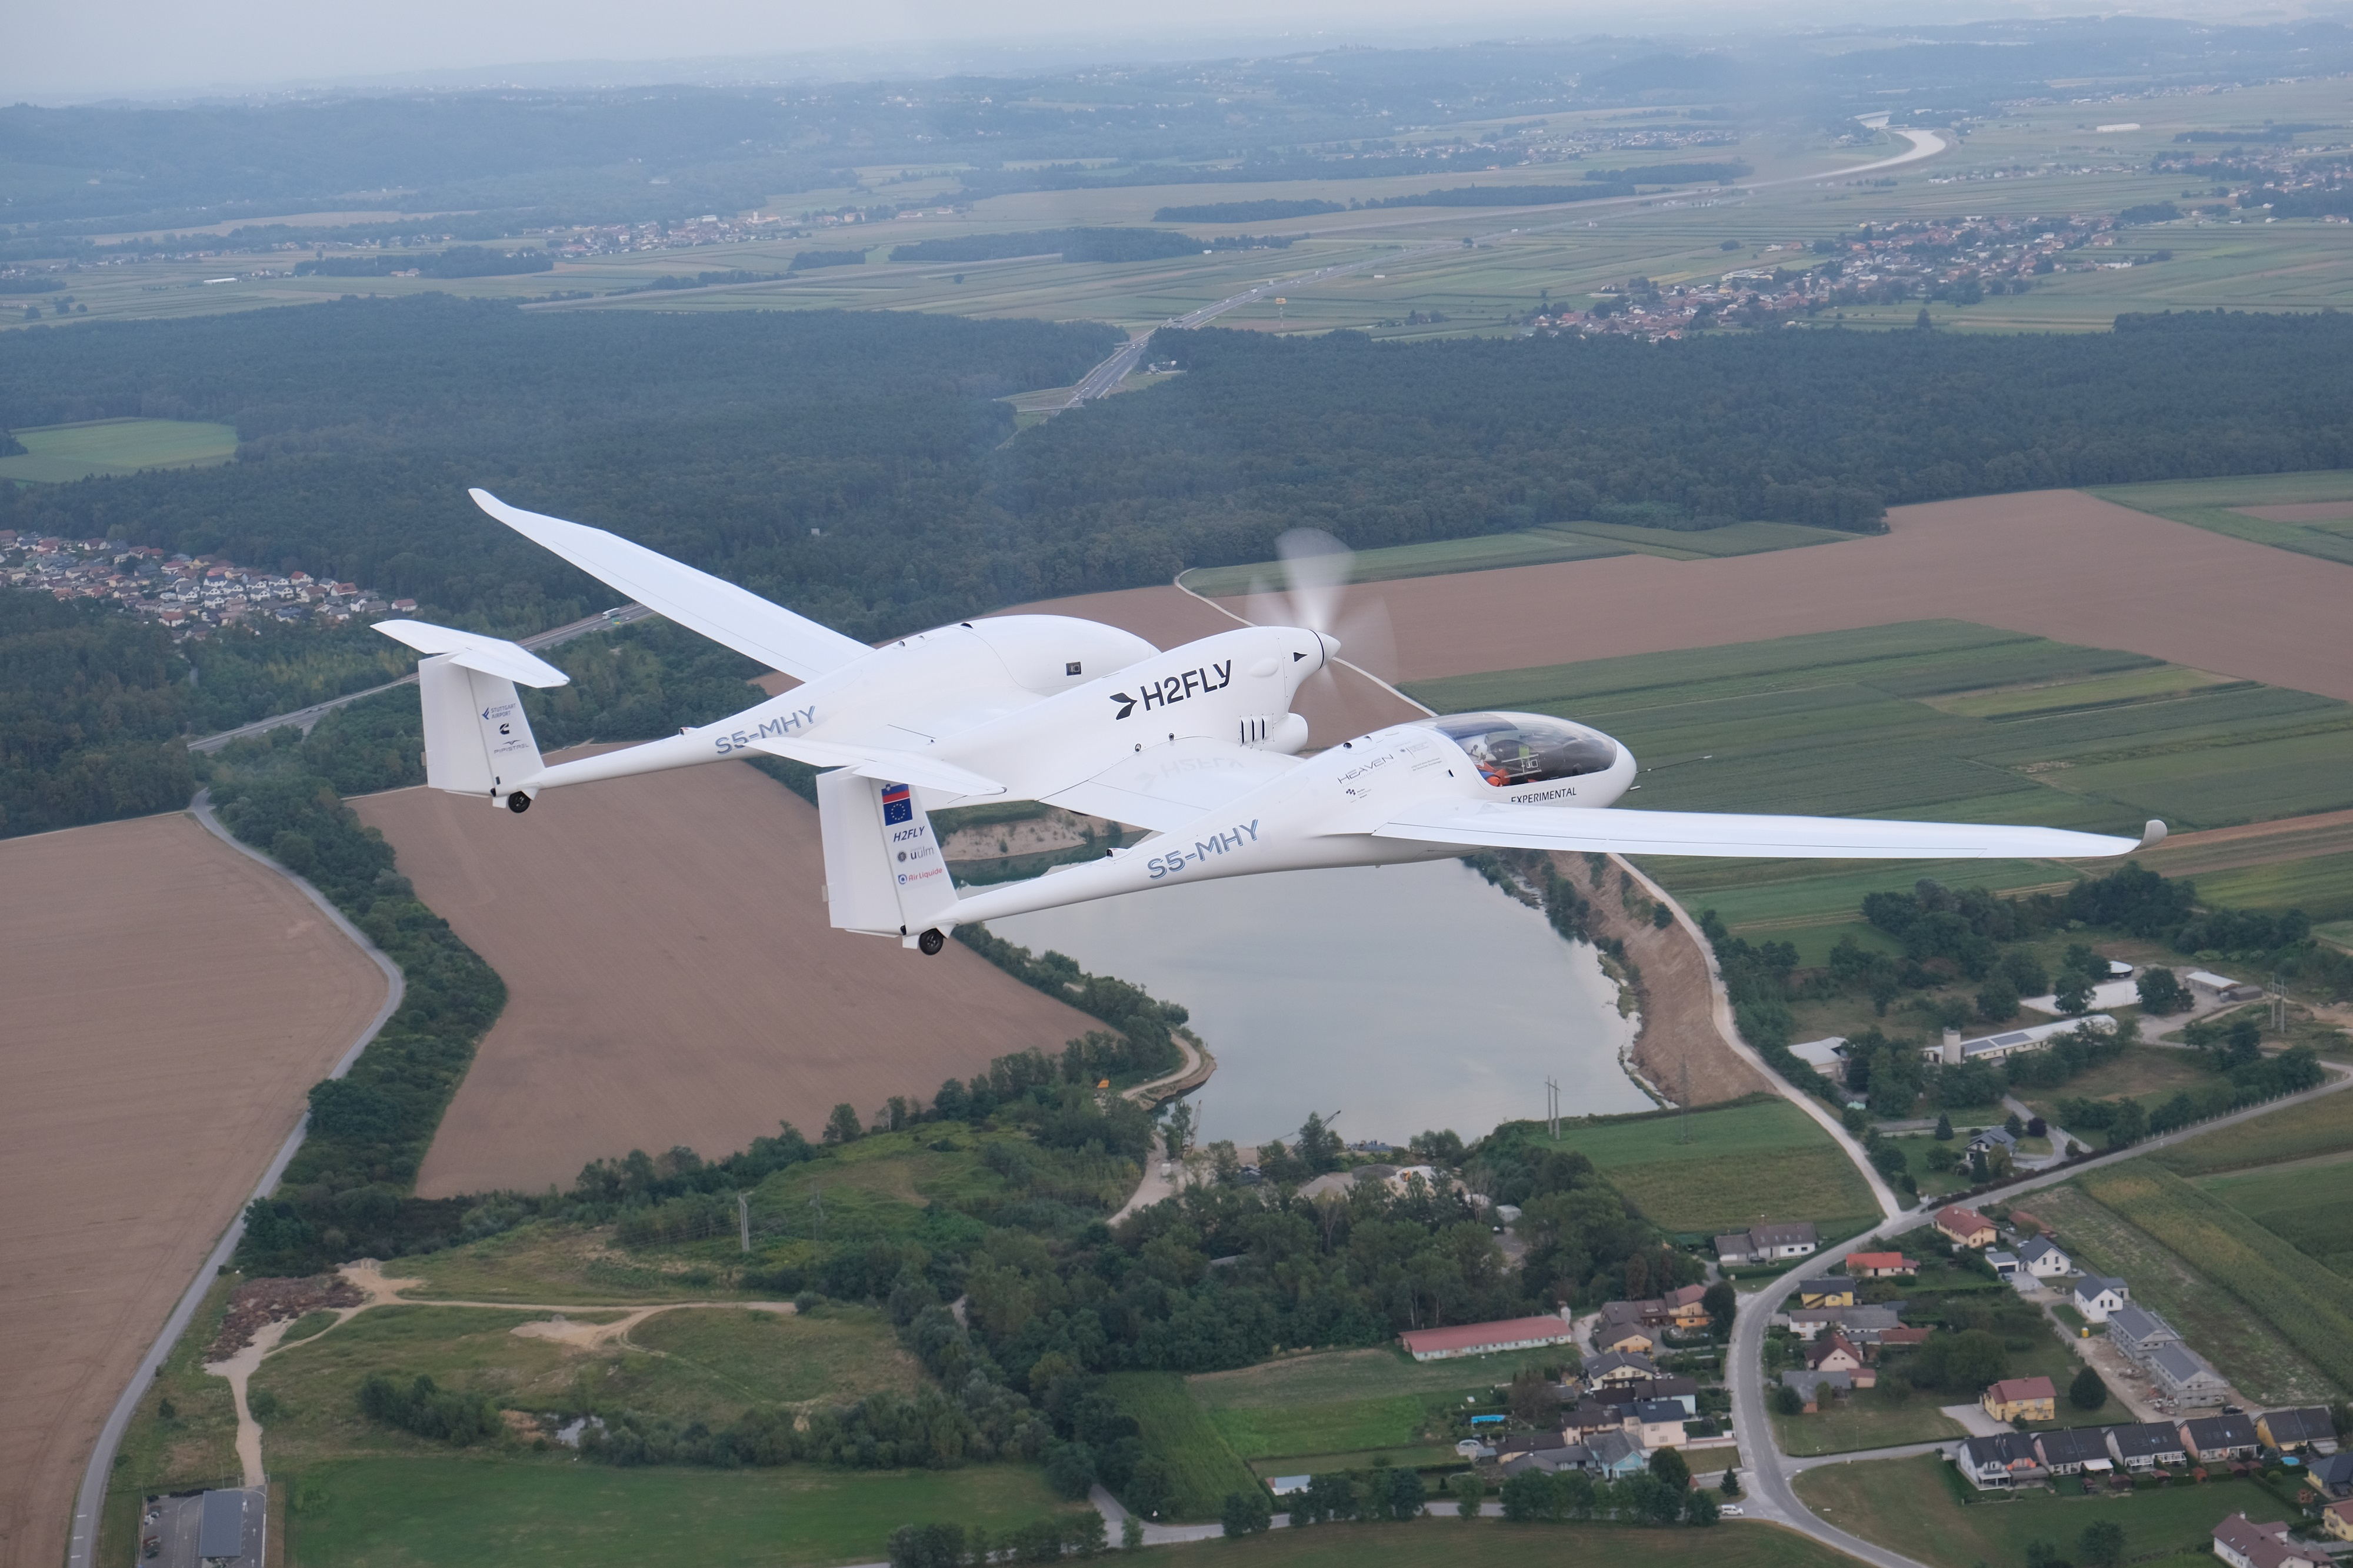 H2FLY’s HY4 electric demonstrator aircraft flying above Maribor, Slovenia, powered by liquid hydrogen